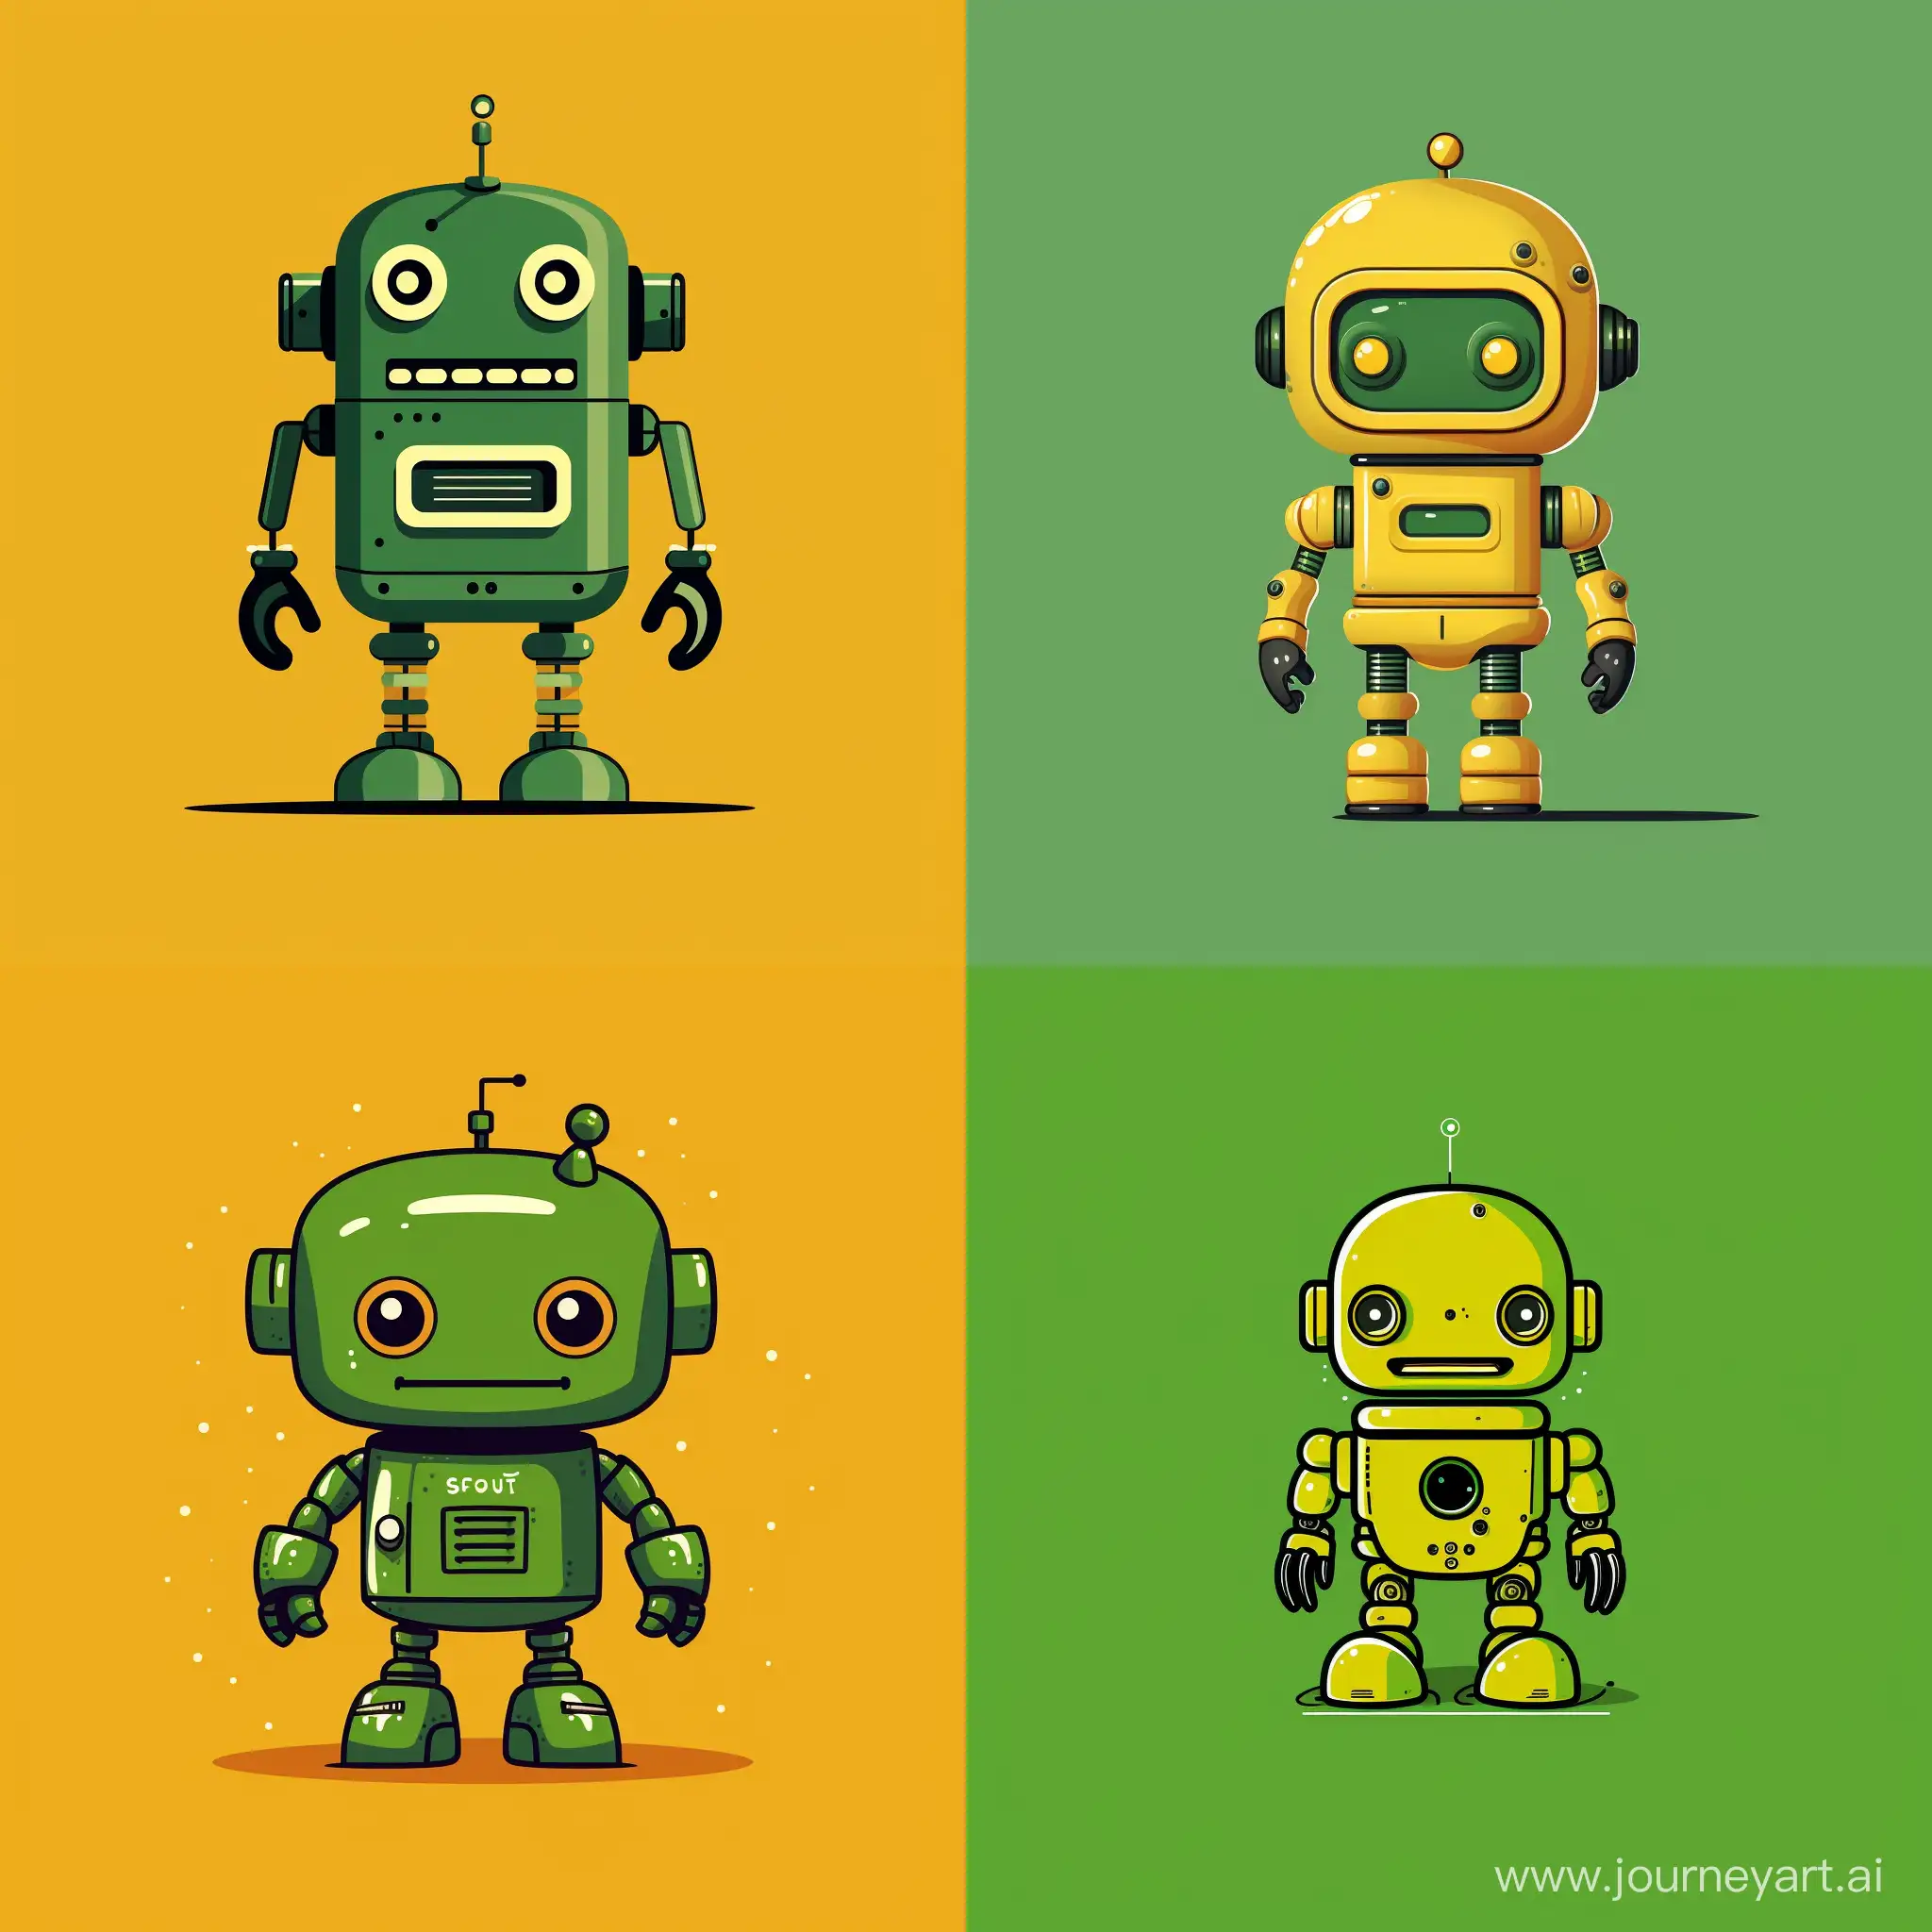 Whimsical-Yellow-Robot-Illustration-on-Green-Background